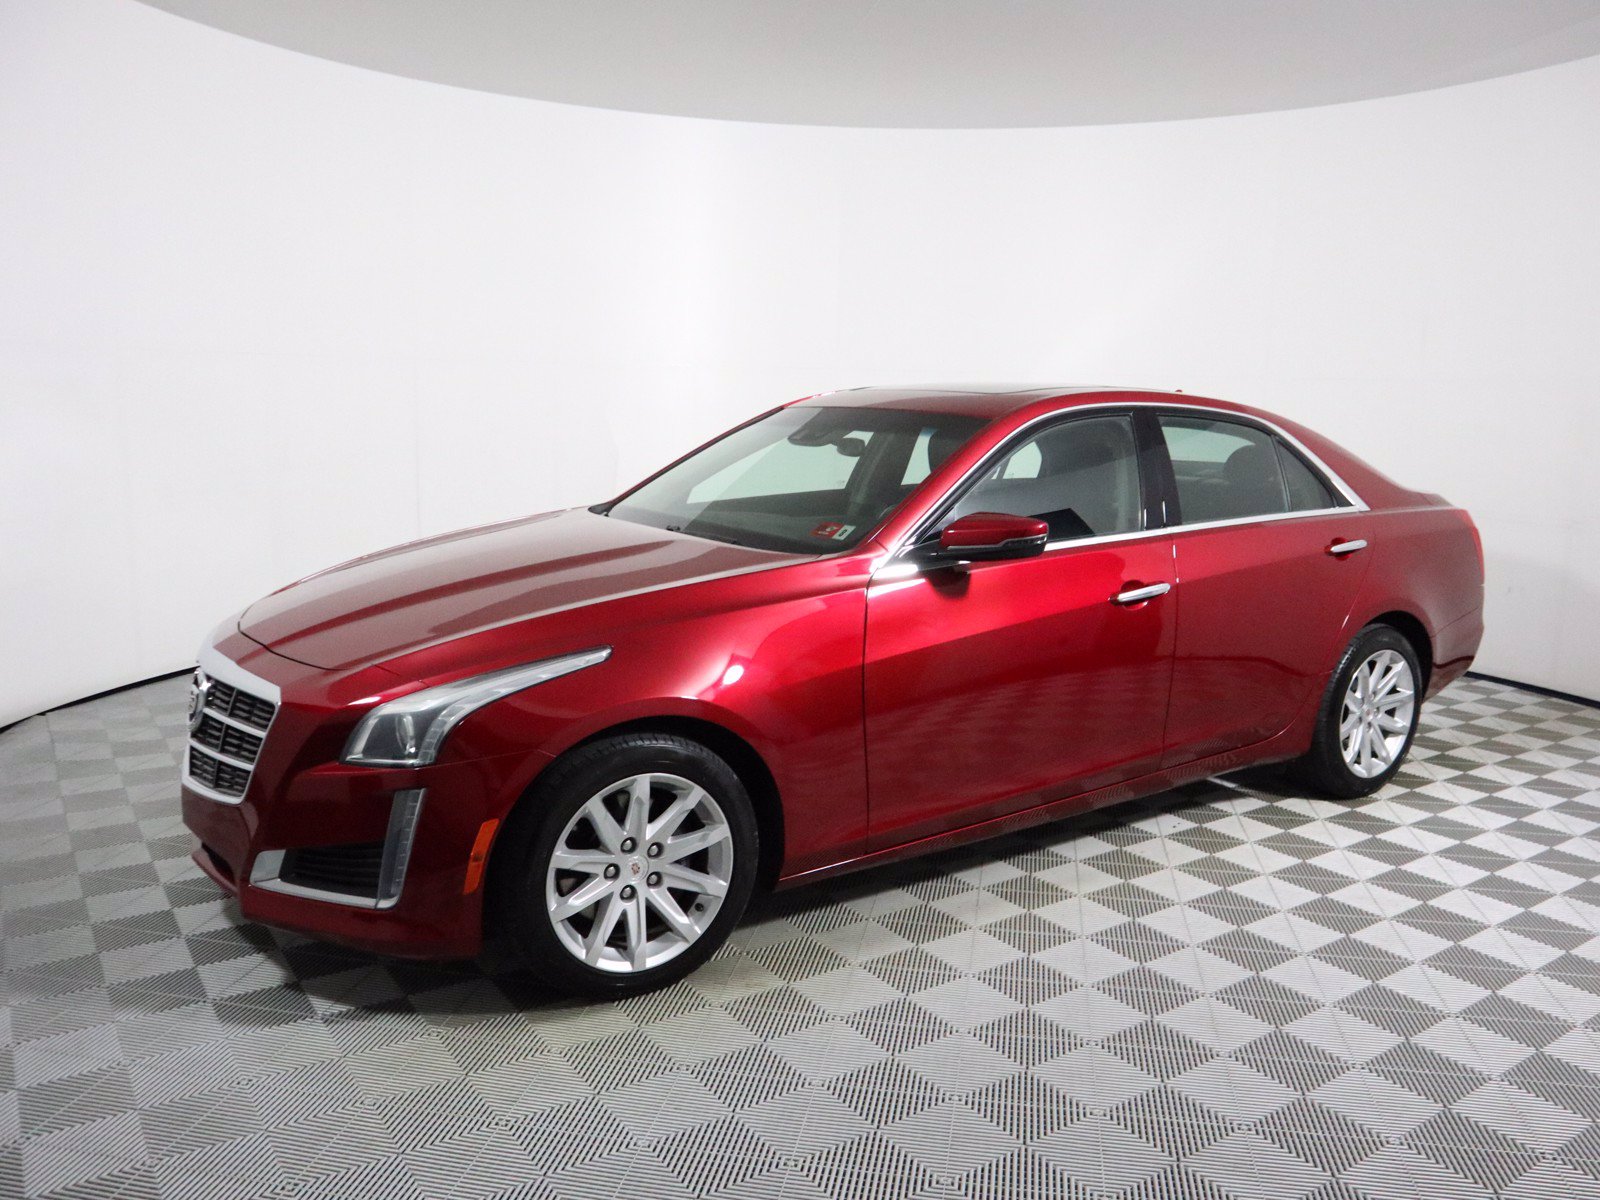 Pre-Owned 2014 Cadillac CTS Sedan Luxury AWD 4dr Car in Parkersburg #